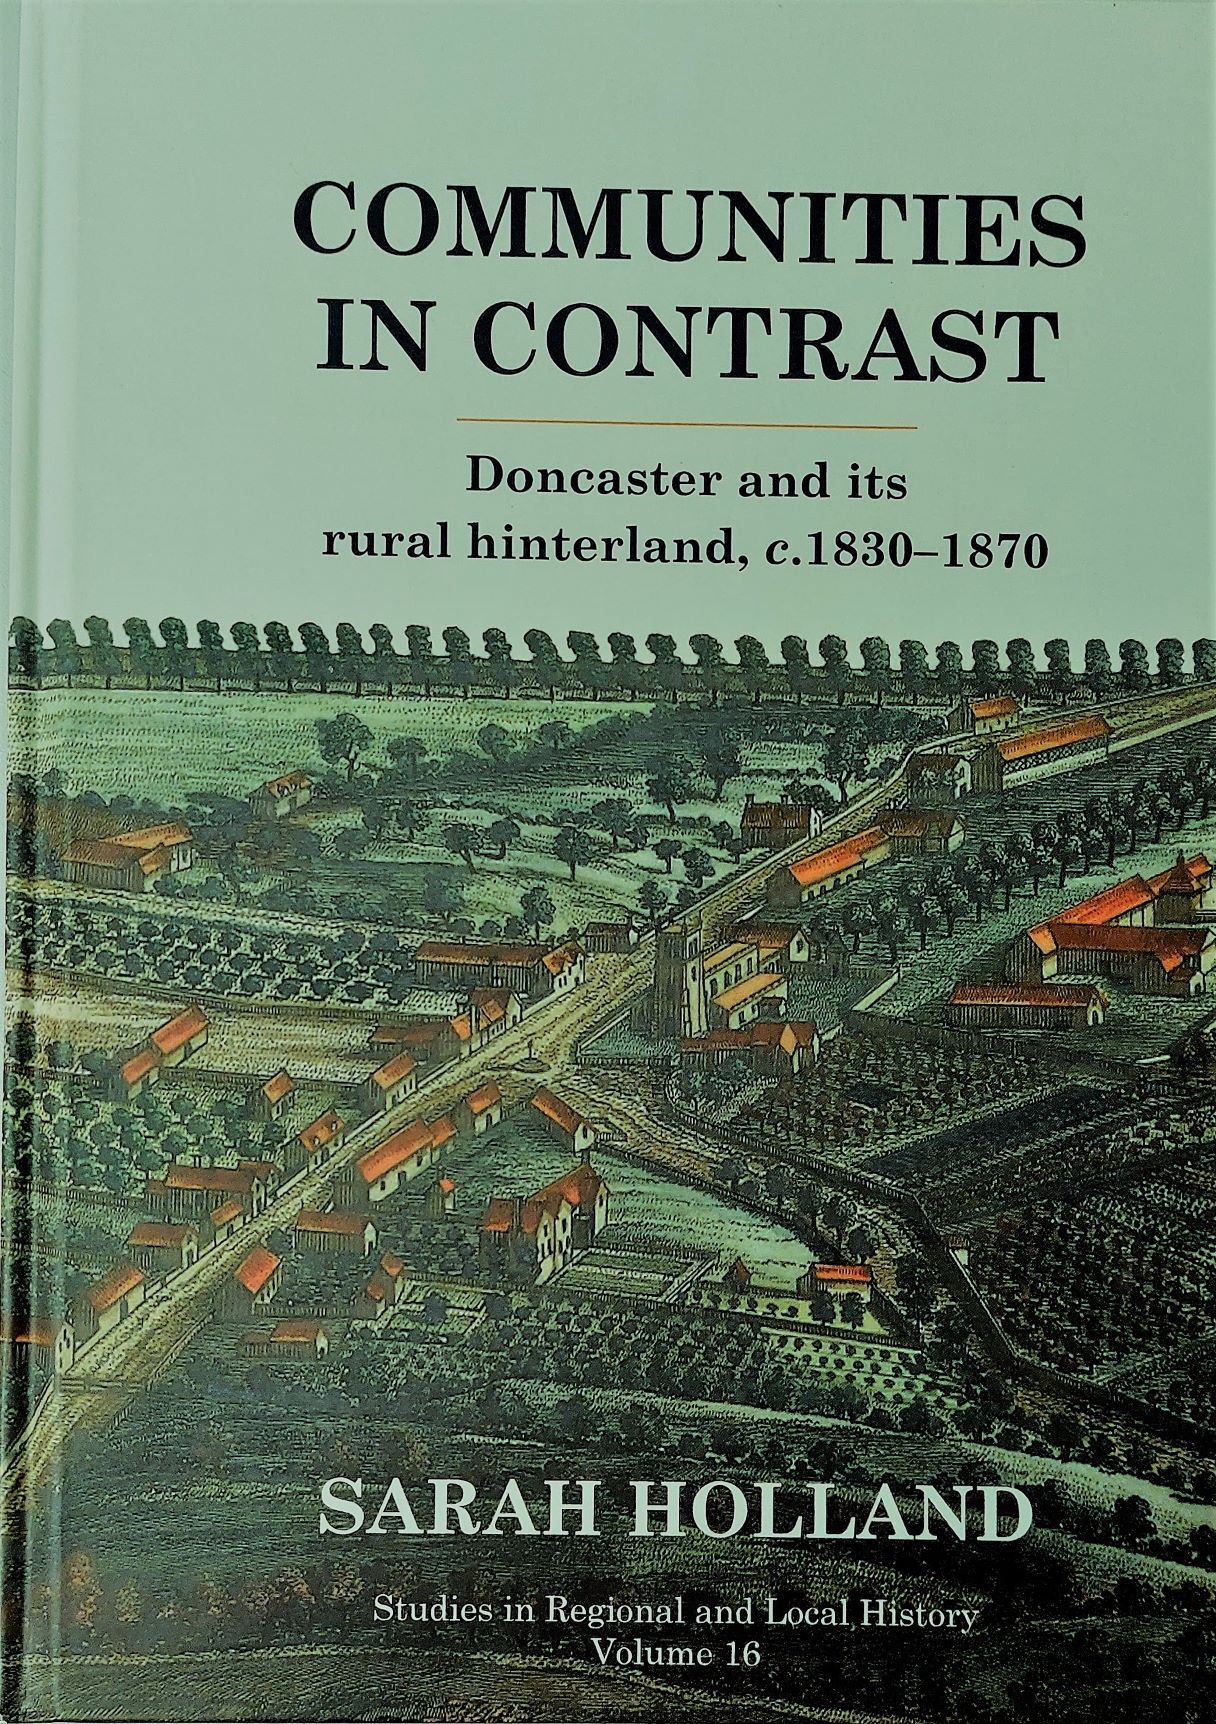 Image for Communities in Contrast: Doncaster and its rural hinterland c.1830-1870